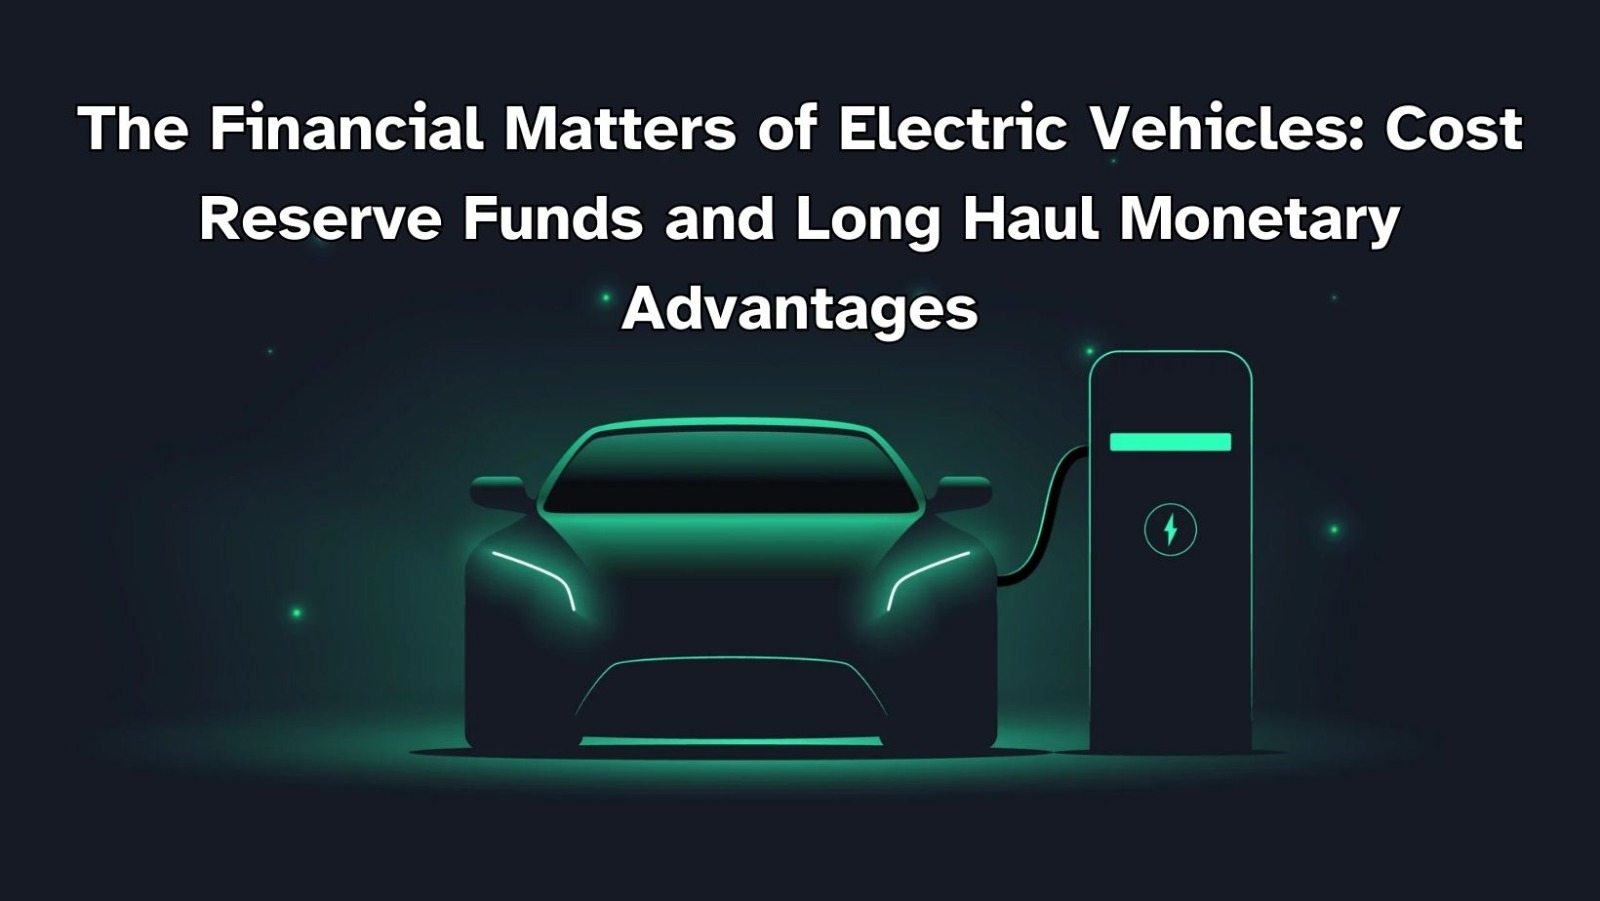 The Financial Matters of Electric Vehicles: Cost Reserve Funds and Long Haul Monetary Advantages